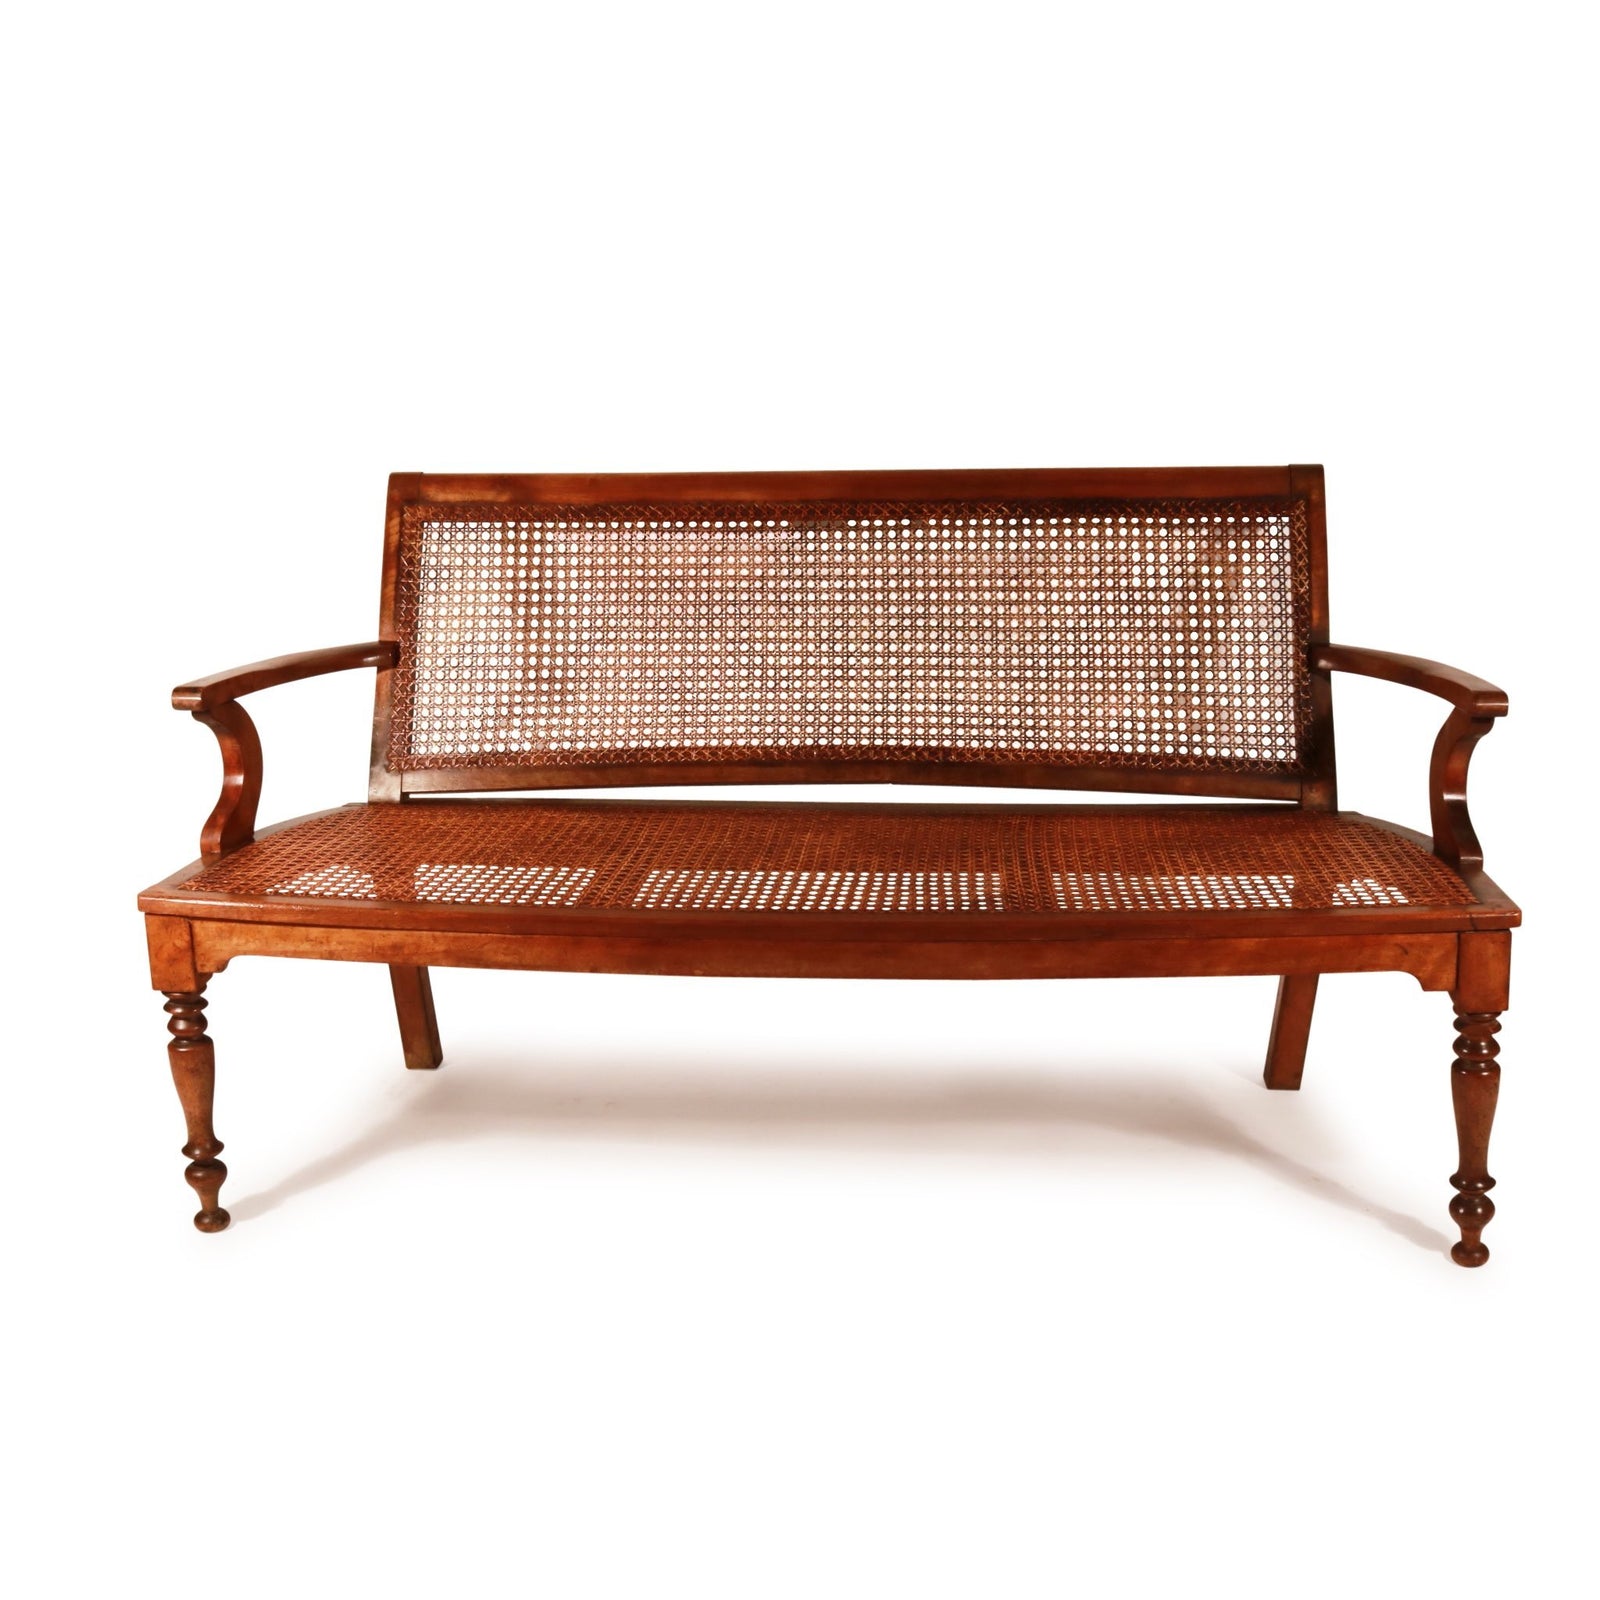 Anglo Indian Caned Teak Bench - 19thC | Indigo Oriental Antiques